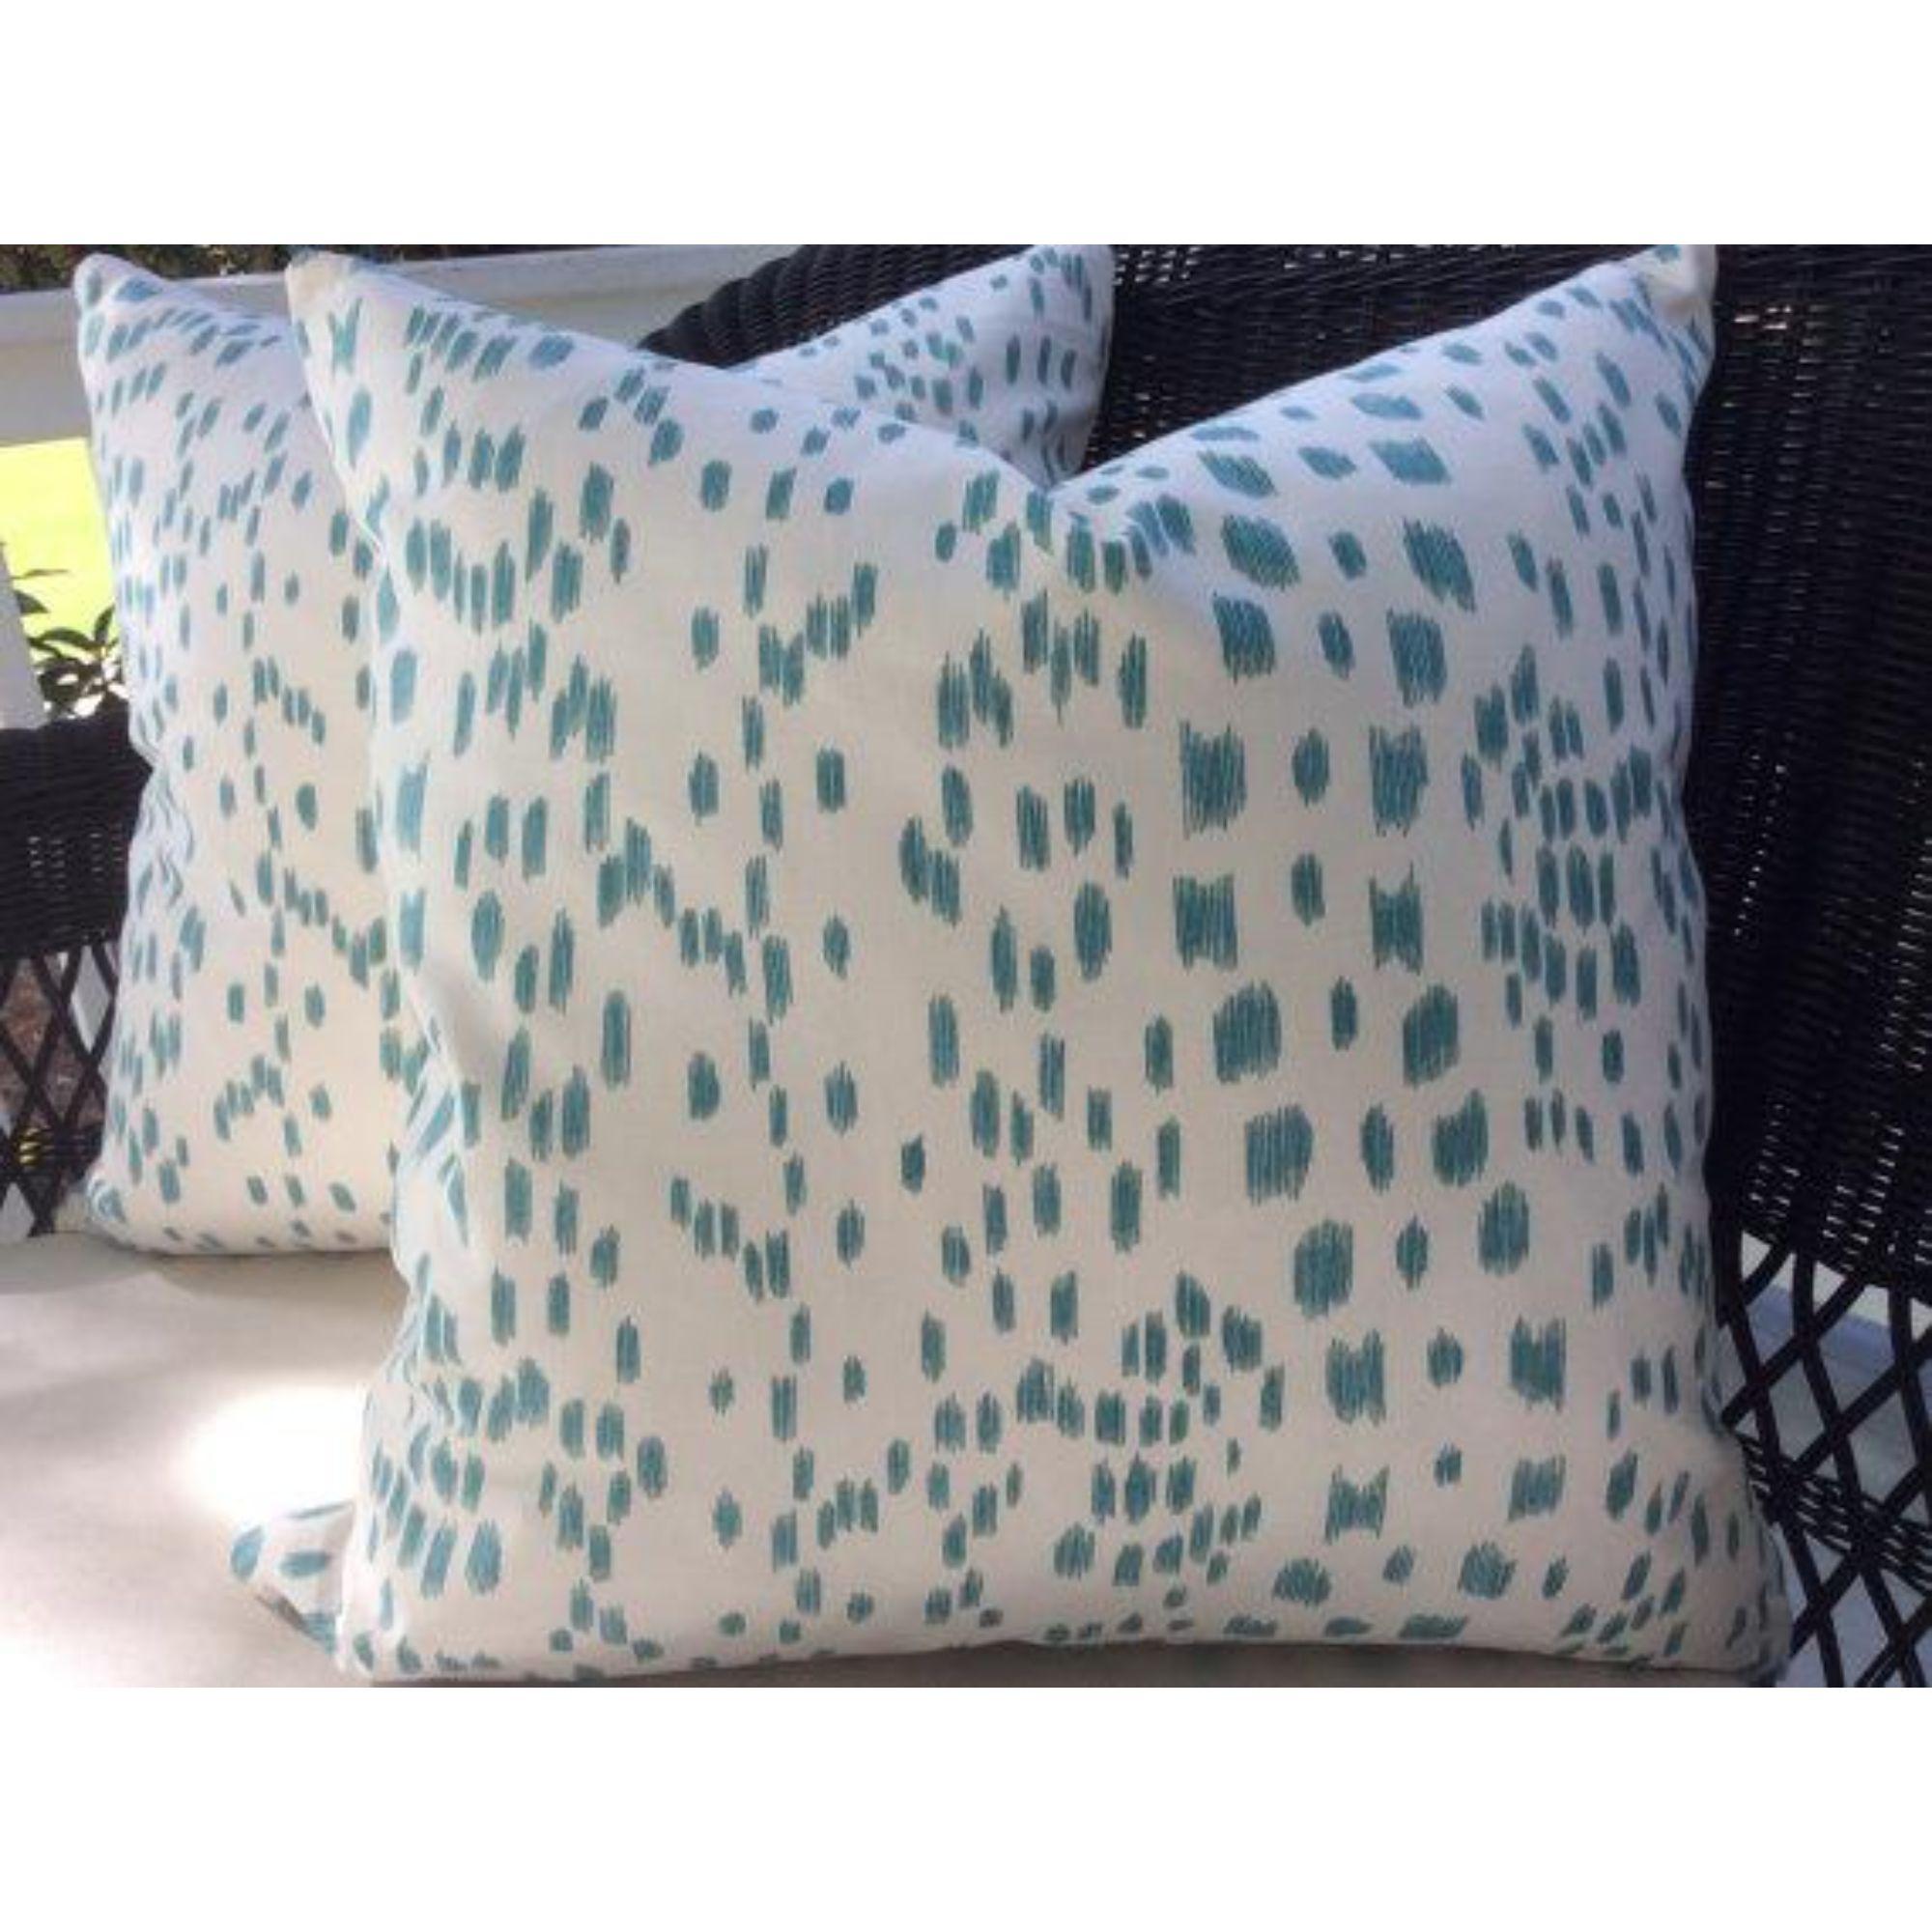 Beautiful and sought after Les Touches from Brunschwig and Fils! This fabulous cotton print has been fashioned into pilllow covers! The back is a coordinating cream woven and closure is by way of invisible zipper!

These pillows measure 22